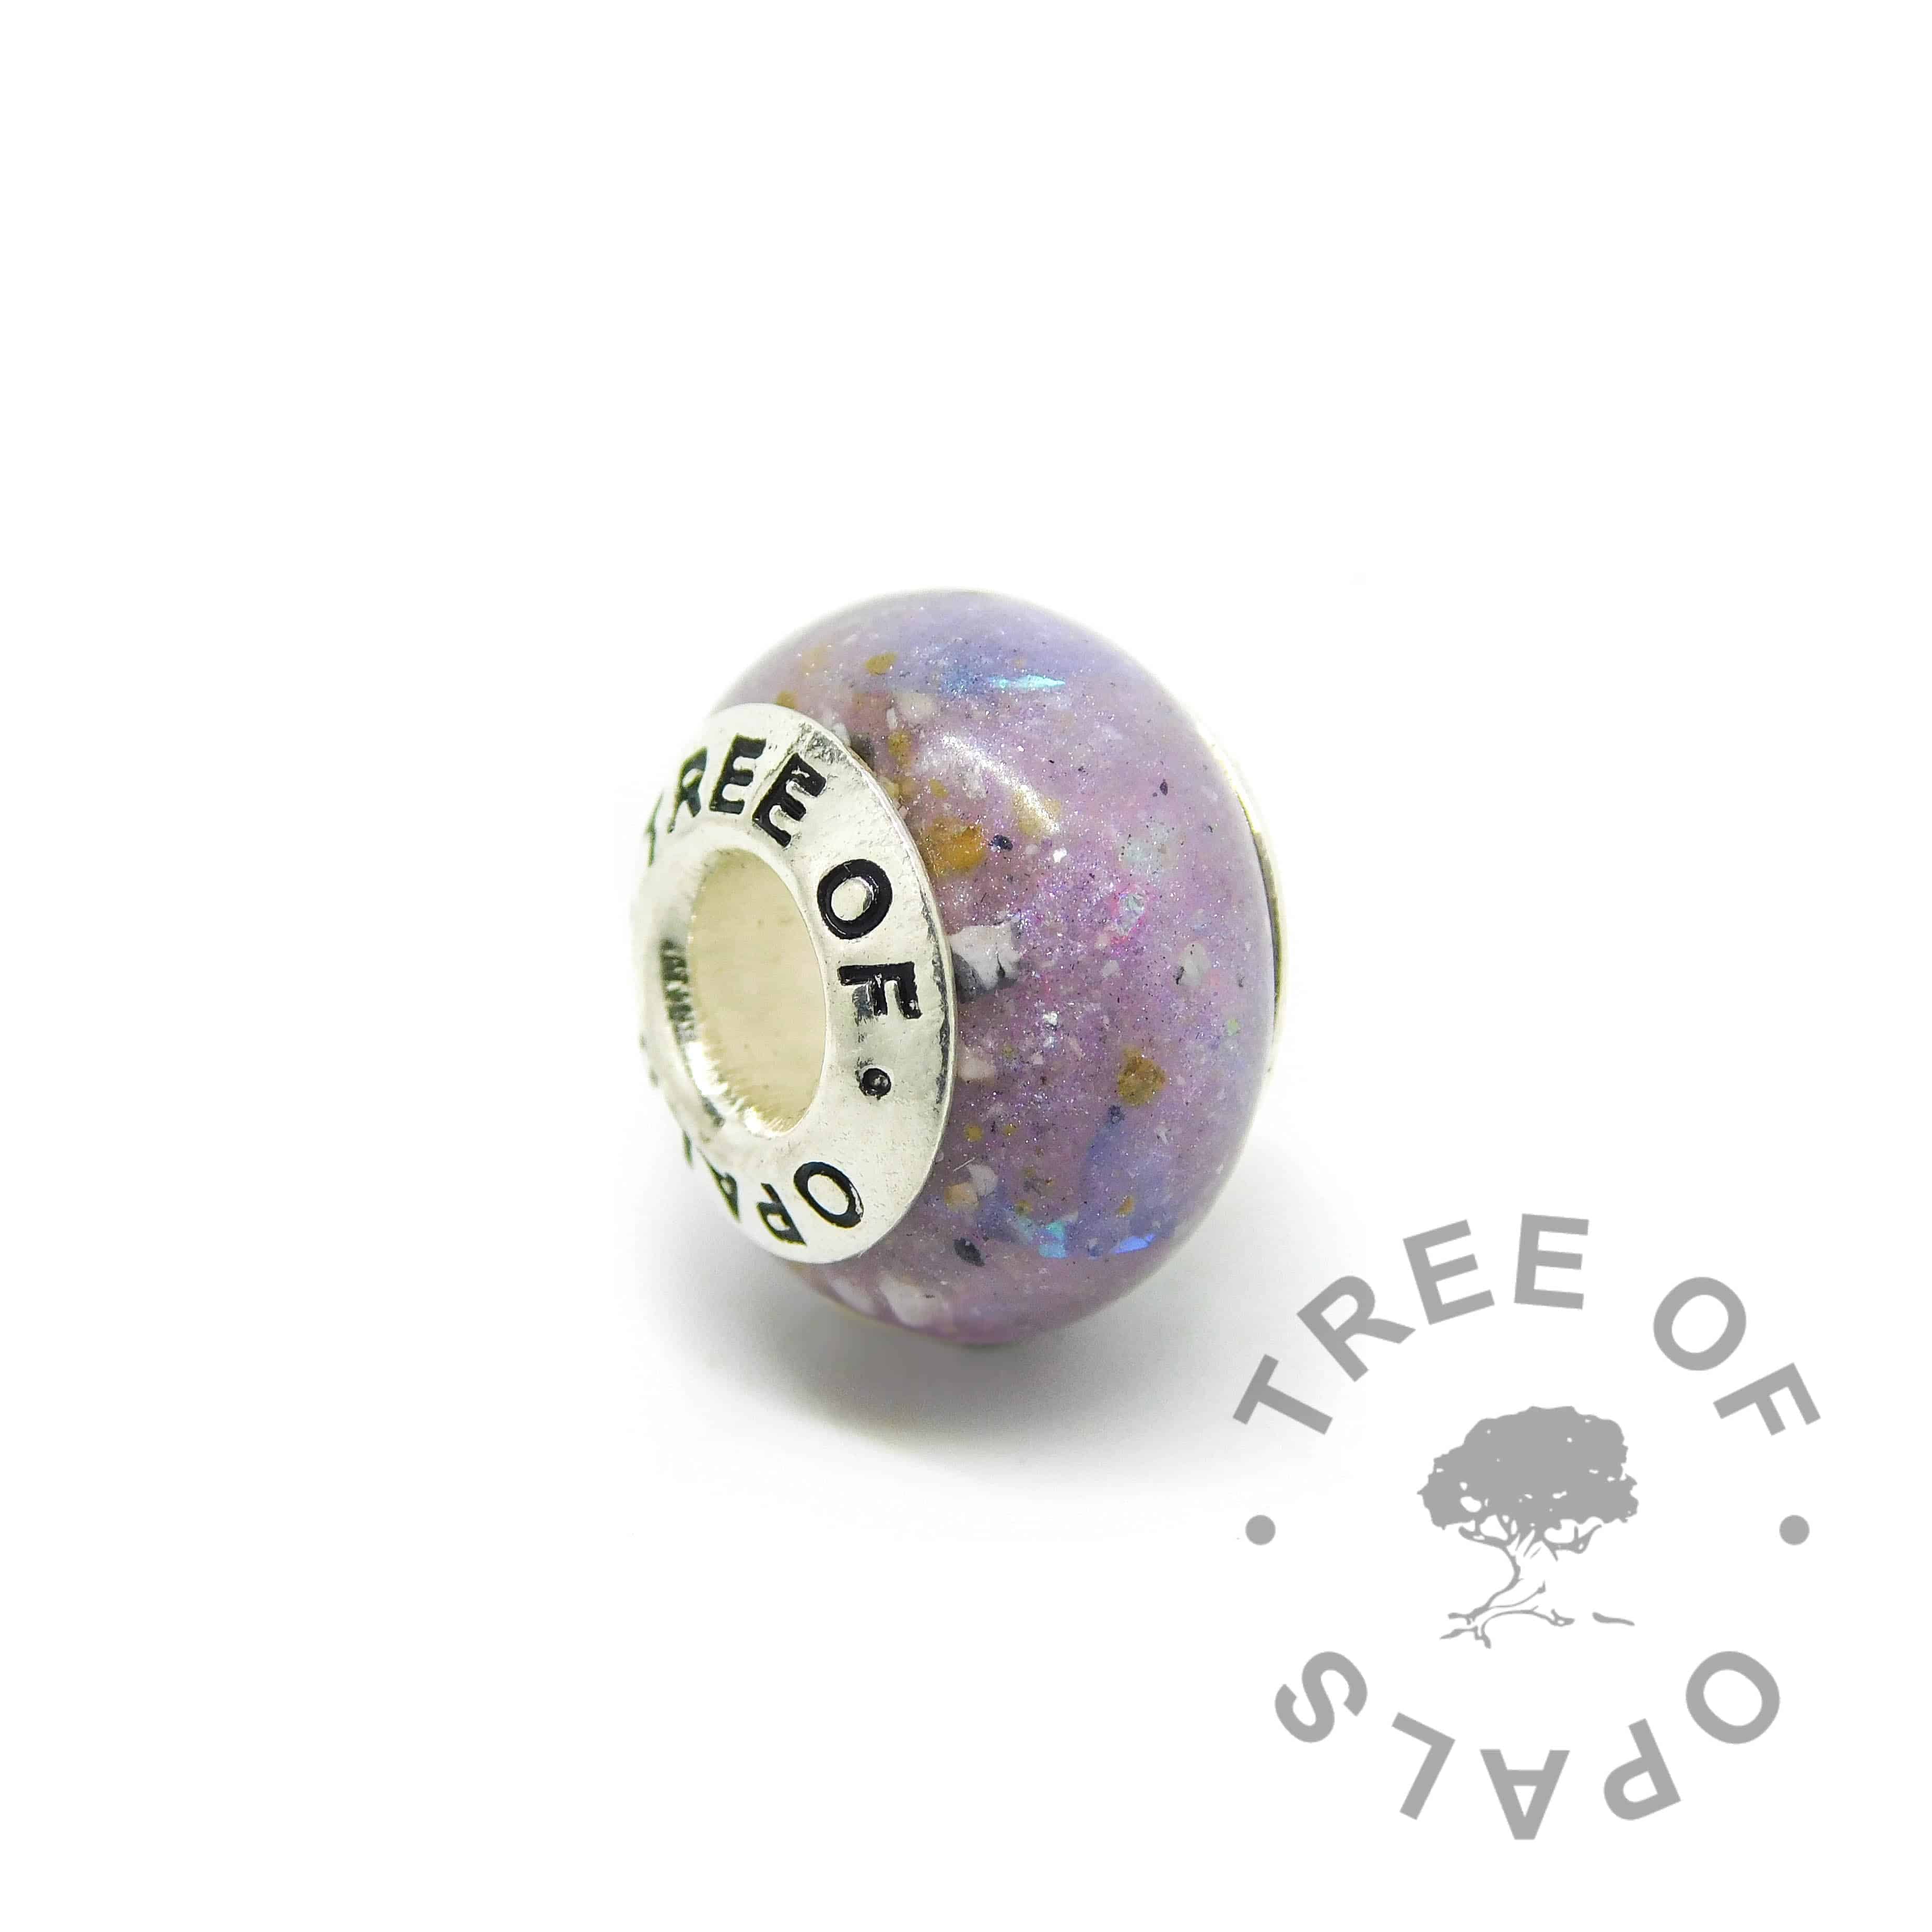 cremation ash charm with orchid purple resin sparkle mix, genuine diamond powder April birthstone. Solid sterling silver Tree of Opals signature core (925 stamped on the back). Watermarked copyright Tree of Opals memorial jewellery image